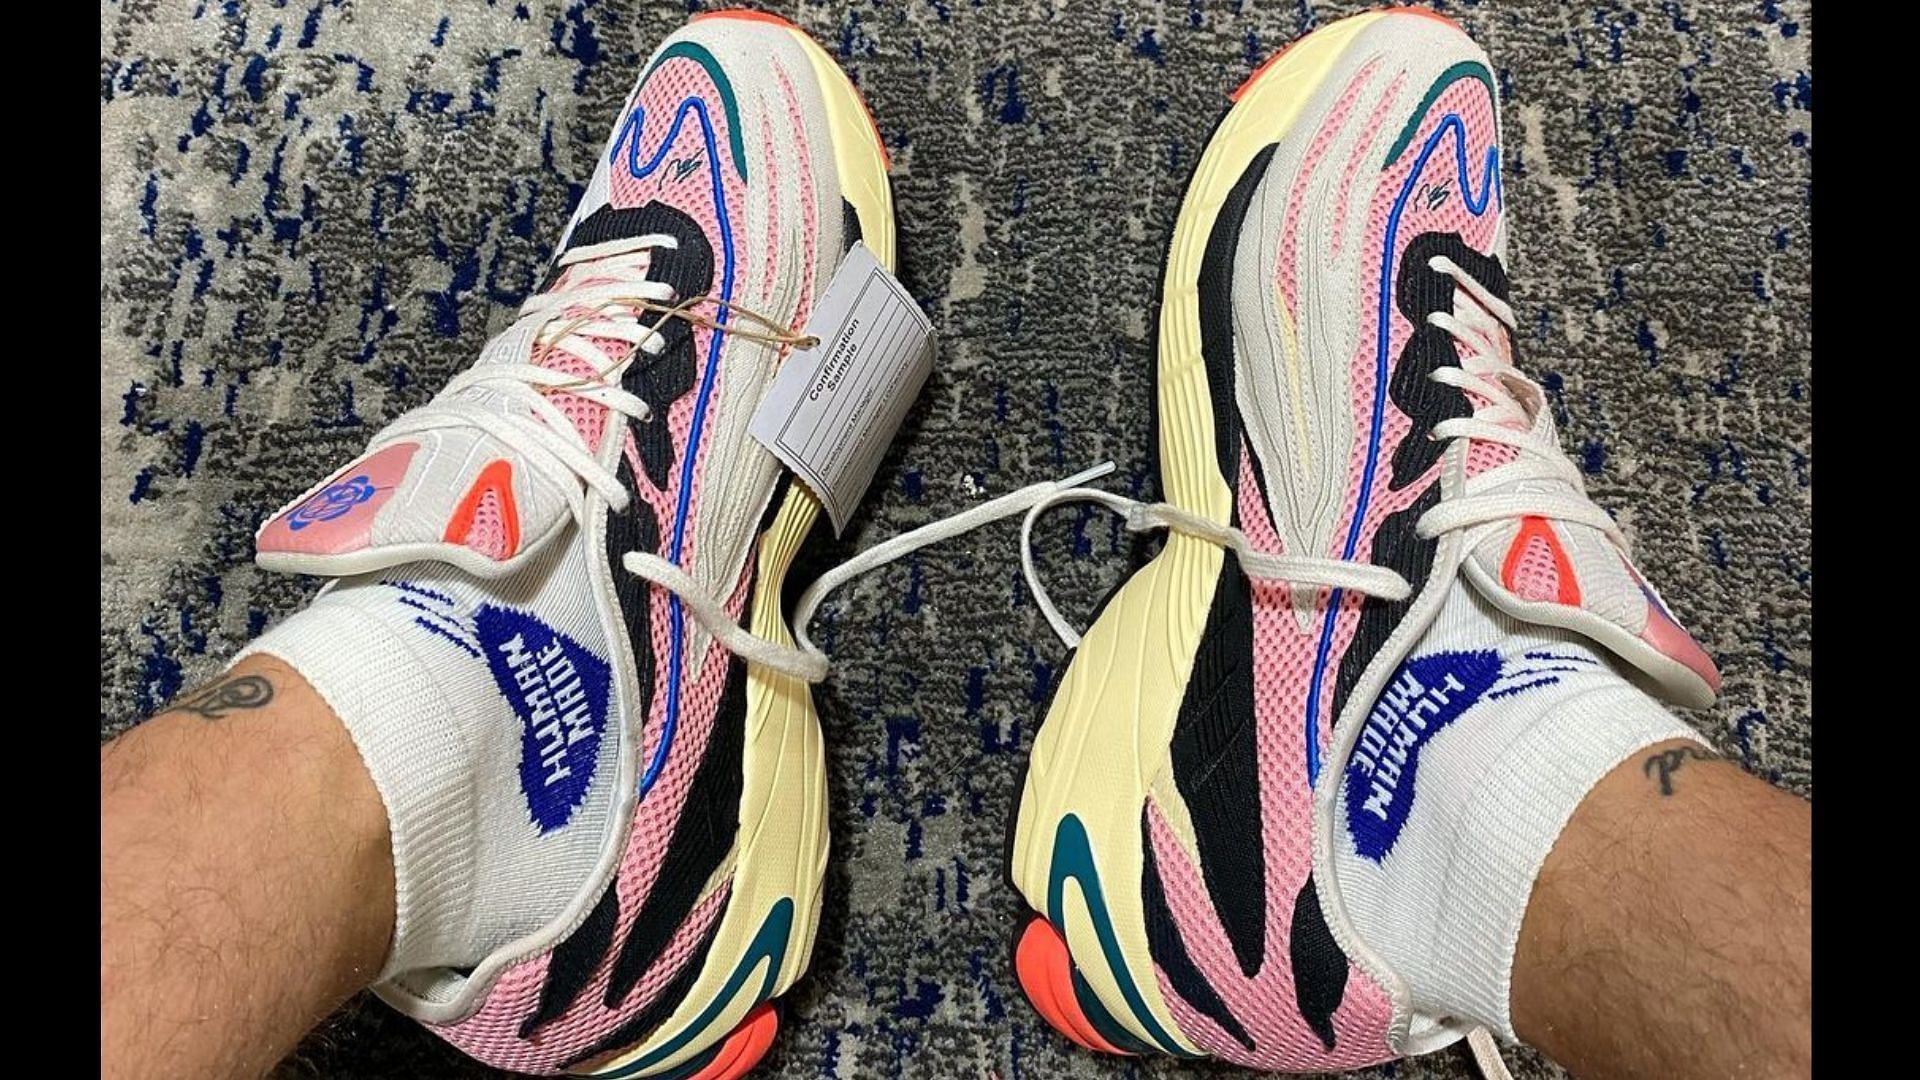 Where to buy Sean Wotherspoon x Adidas Orketro sneakers? Everything we